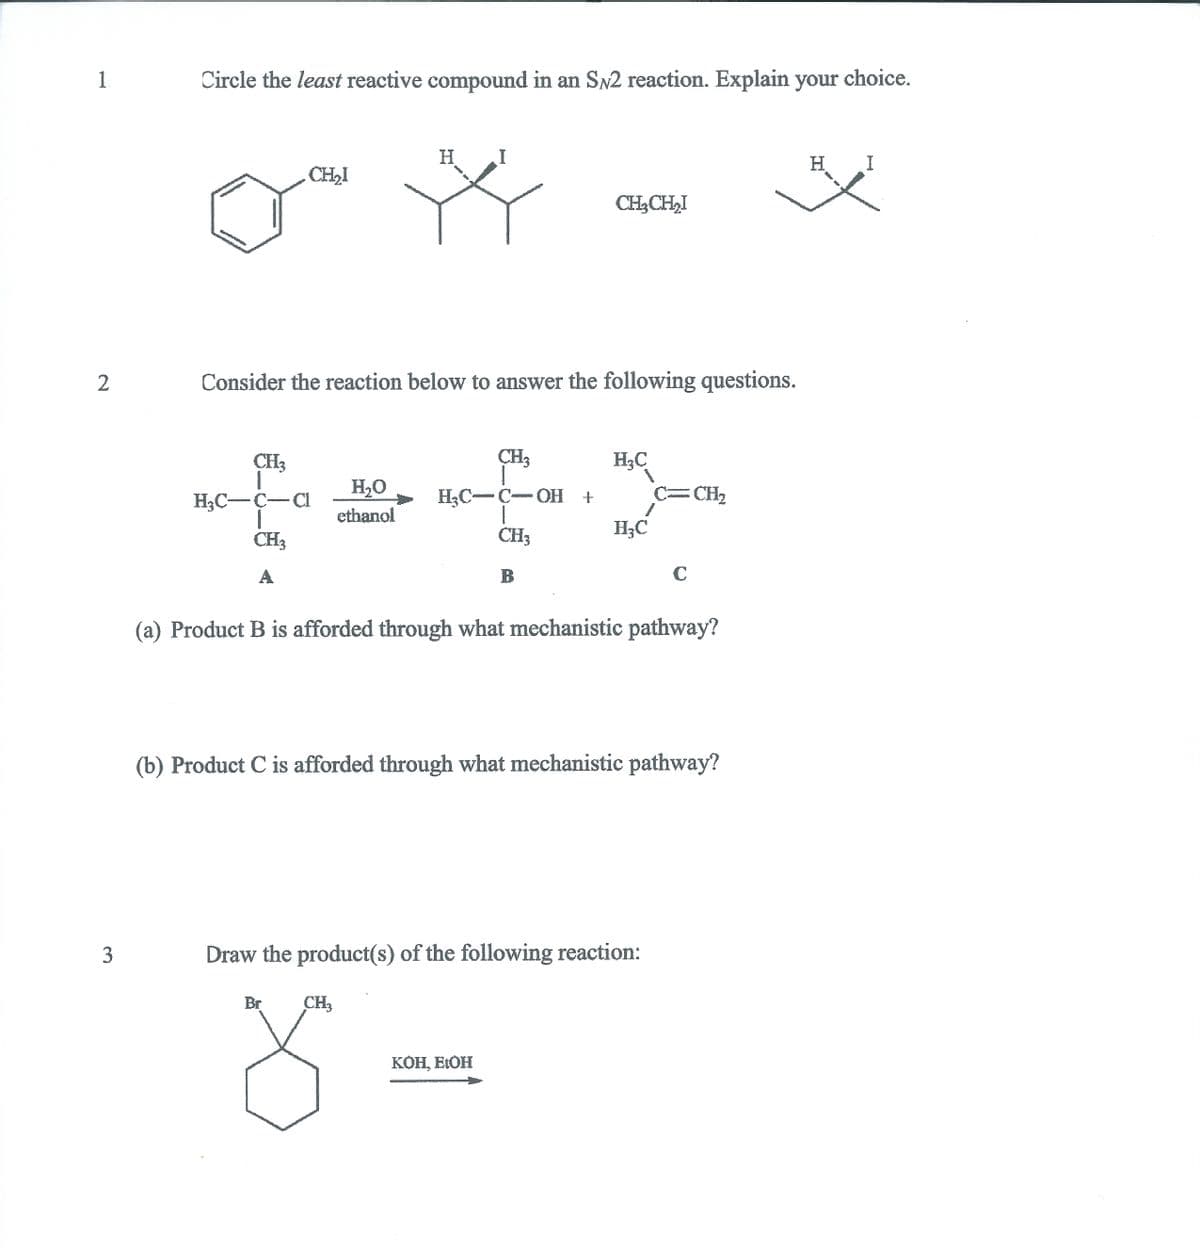 1.
Circle the least reactive compound in an SN2 reaction. Explain your choice.
H.
I
H I
CH,I
CH3CH,I
2
Consider the reaction below to answer the following questions.
CH3
CH3
H3C
H2O
C=CH2
H3C-C-OH +
1
CH3
H3C-C-CI
ethanol
H;C
CH3
A
C
(a) Product B is afforded through what mechanistic pathway?
(b) Product C is afforded through what mechanistic pathway?
Draw the product(s) of the following reaction:
Br
CH3
КОН, ЕОН
3.
